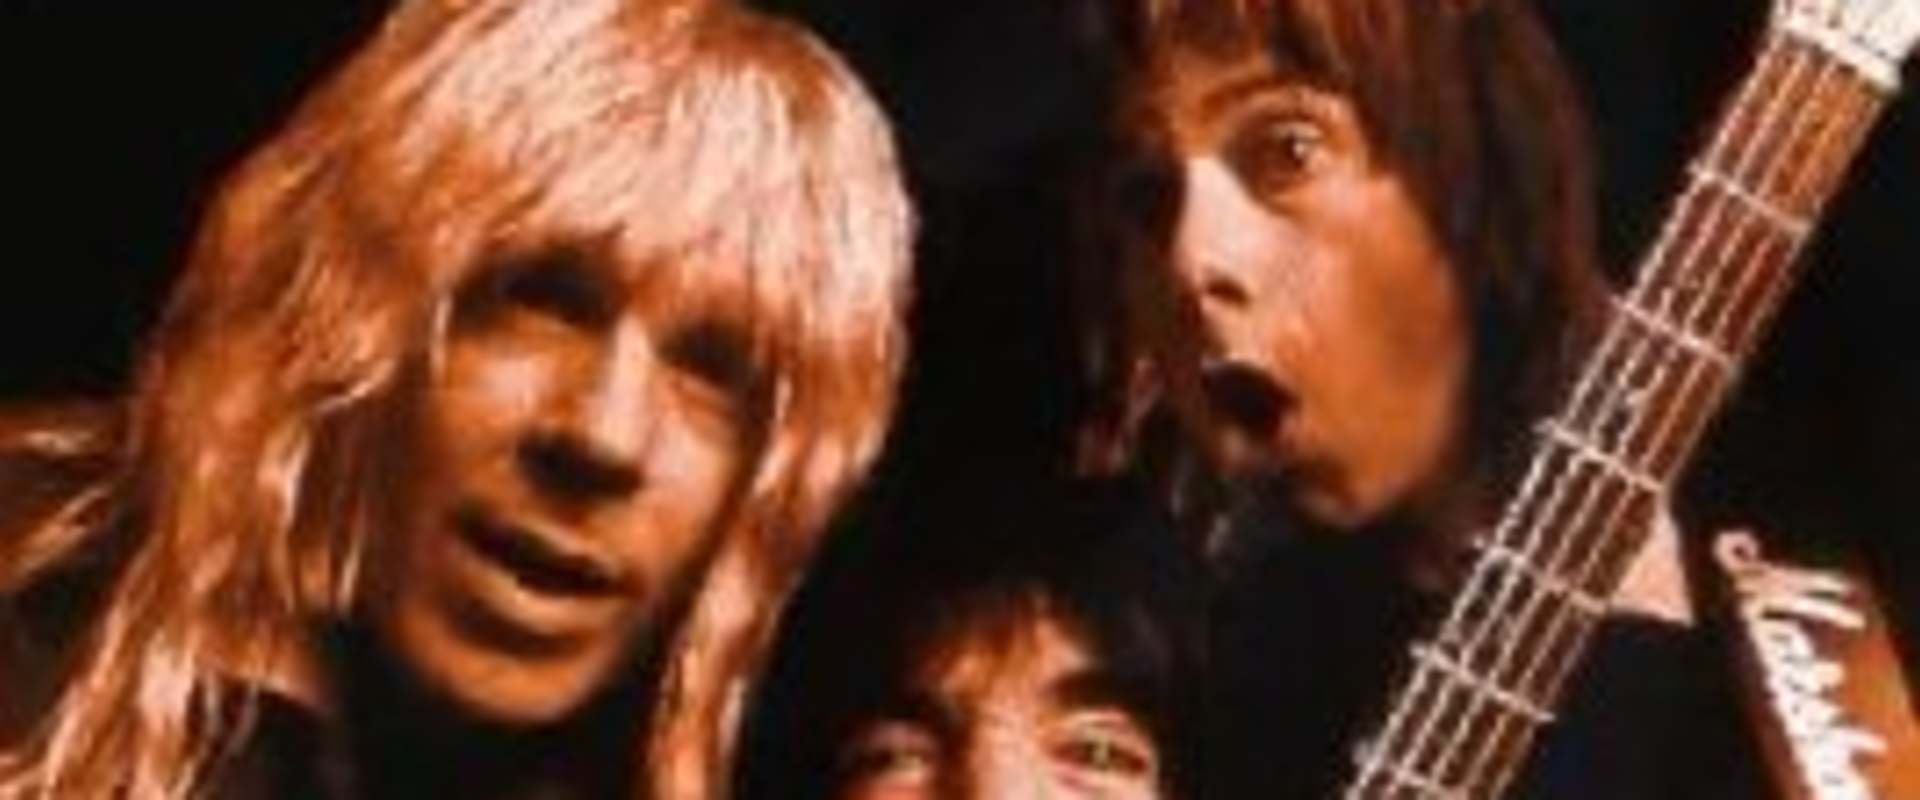 A Spinal Tap Reunion: The 25th Anniversary London Sell-Out background 1